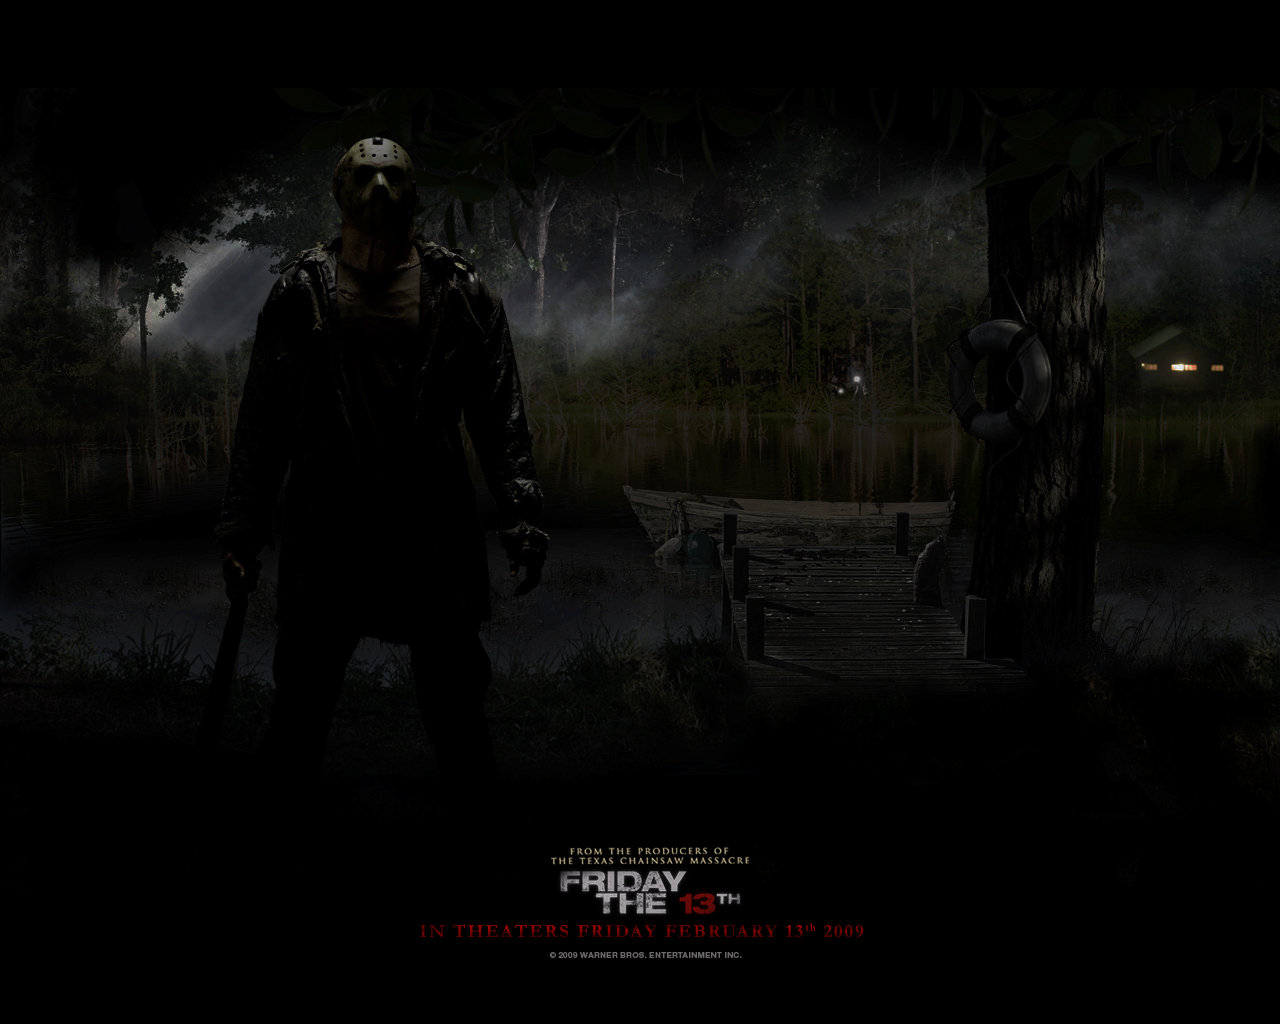 Download full size Friday The 13th wallpaper / Movies / 1280x1024